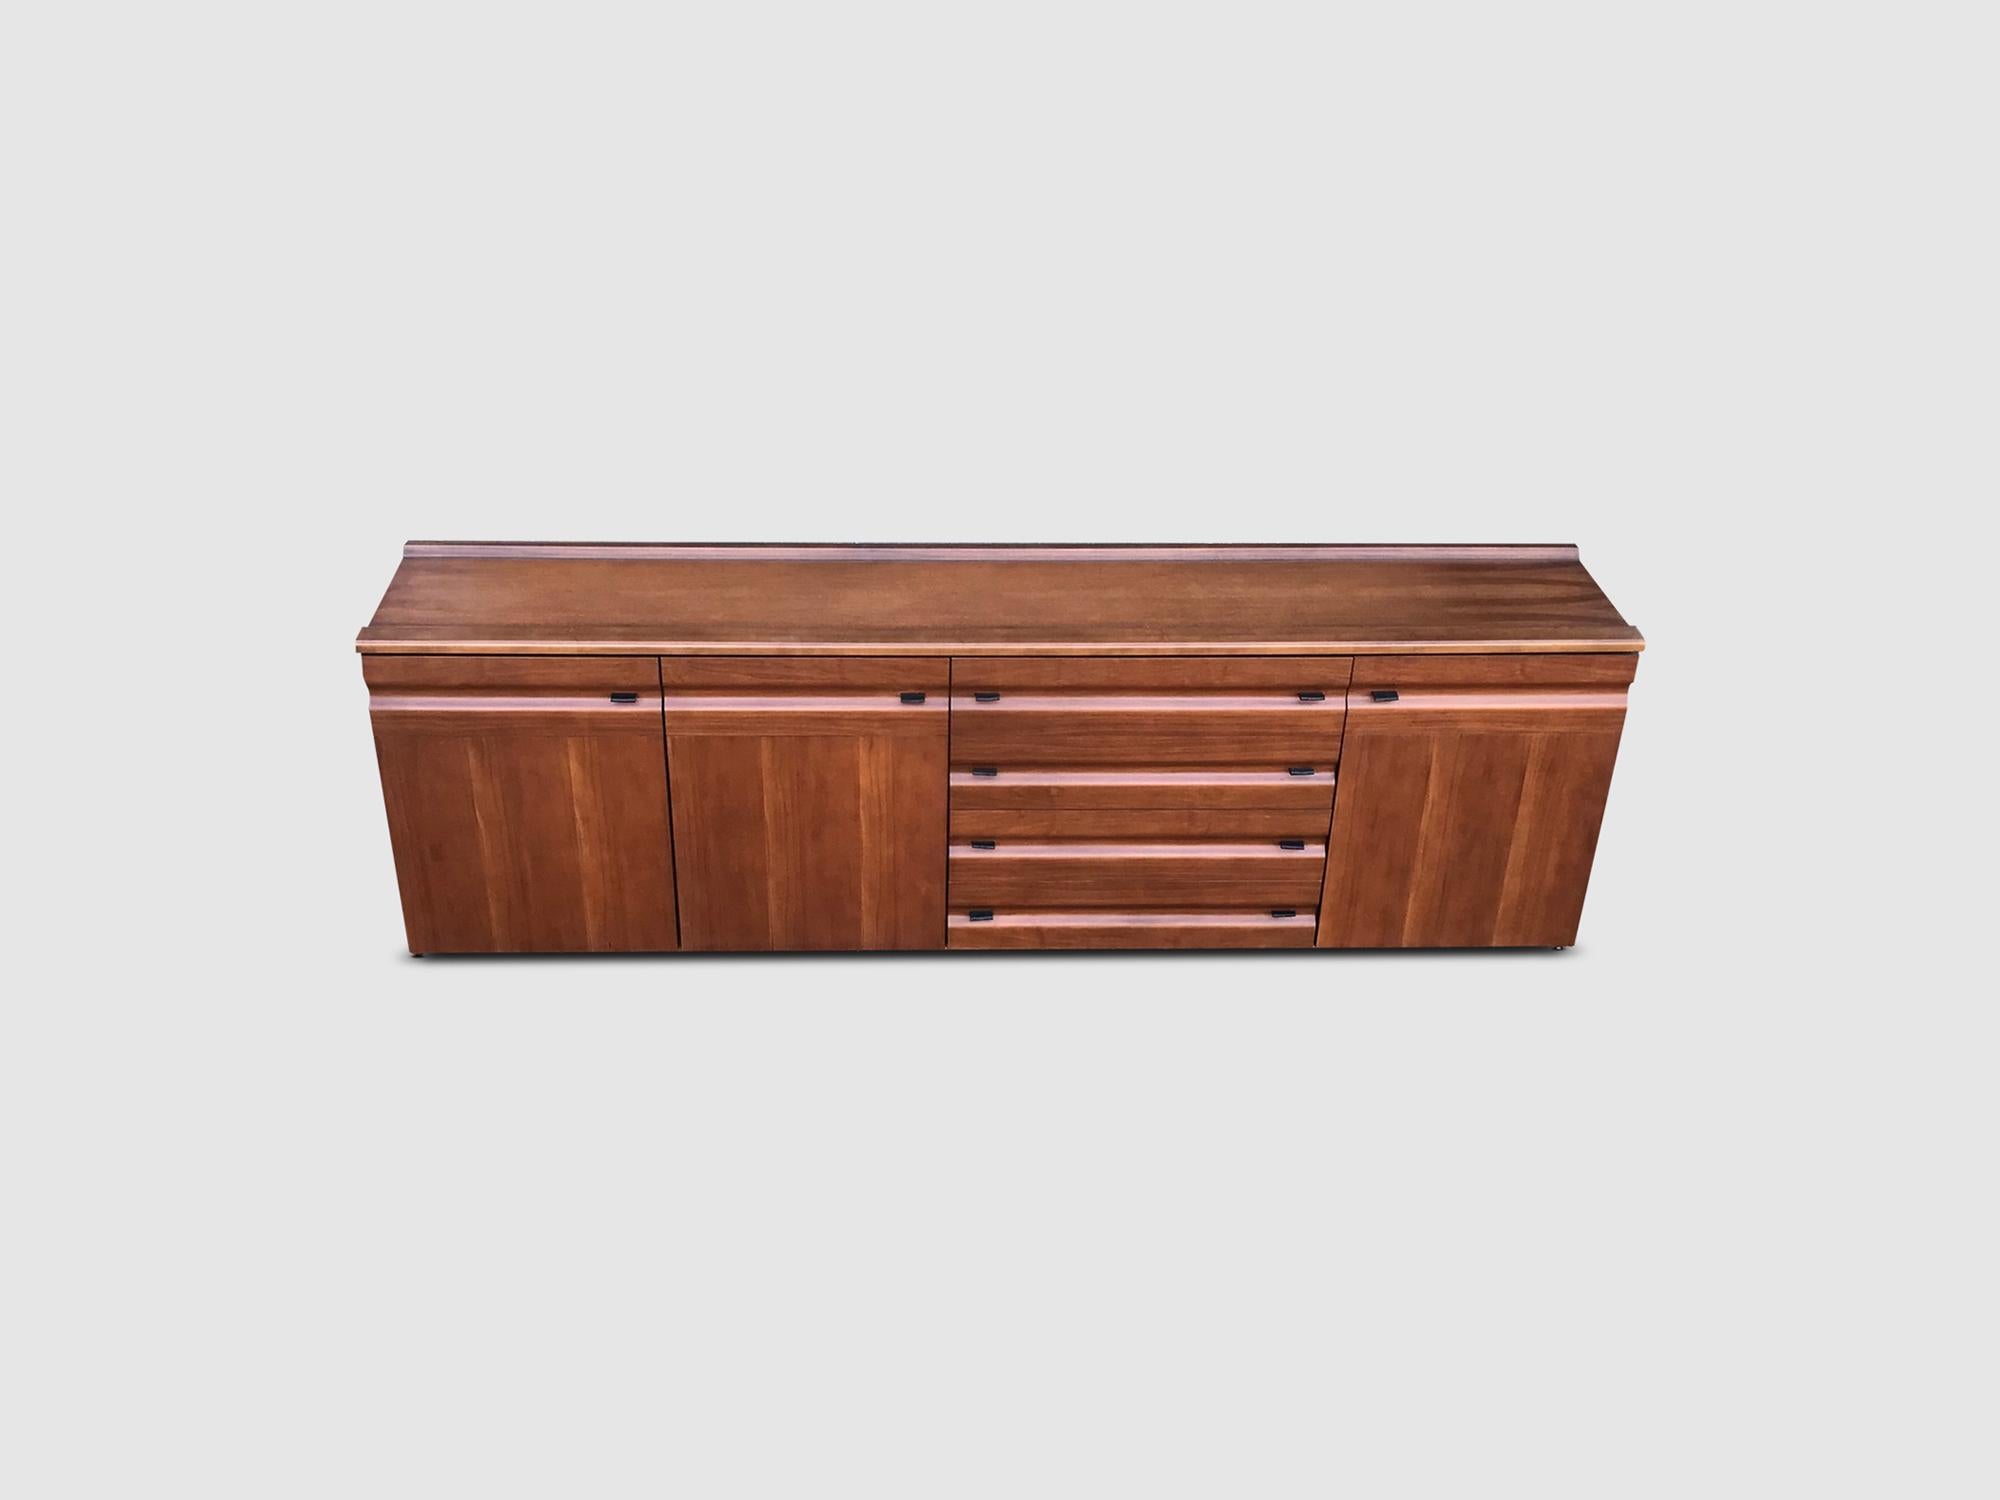 Impressive Sculpted Walnut and Leather Credenza Gavina, Italy, 1970s For Sale 2